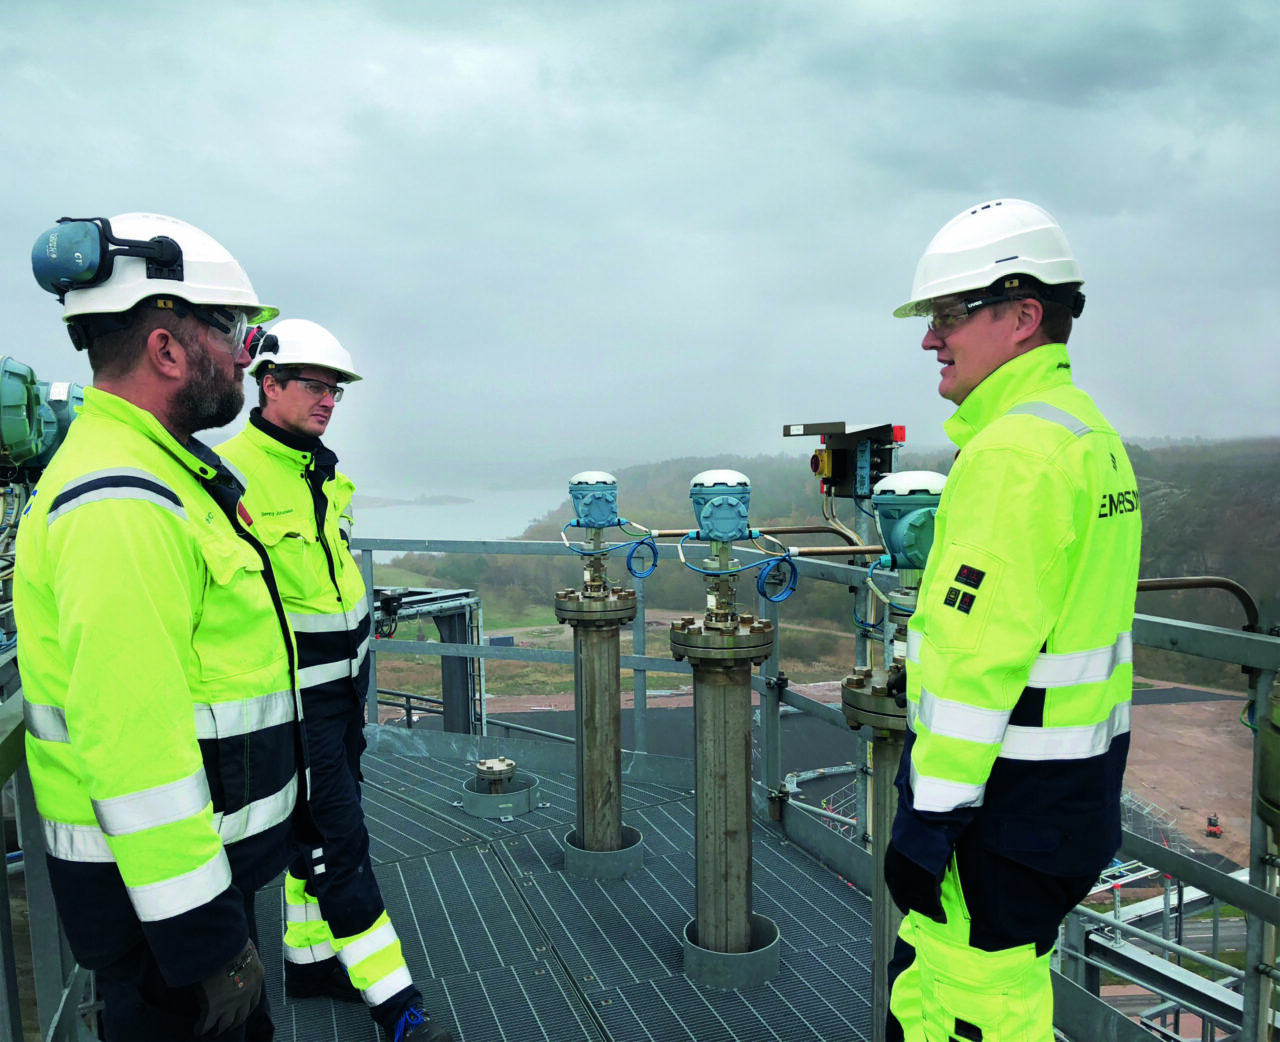 Three Rosemount 5900S Radar Level Gauges are ensuring reliable and safe operation at the Gasum LNG Terminal in Lysekil, Sweden.